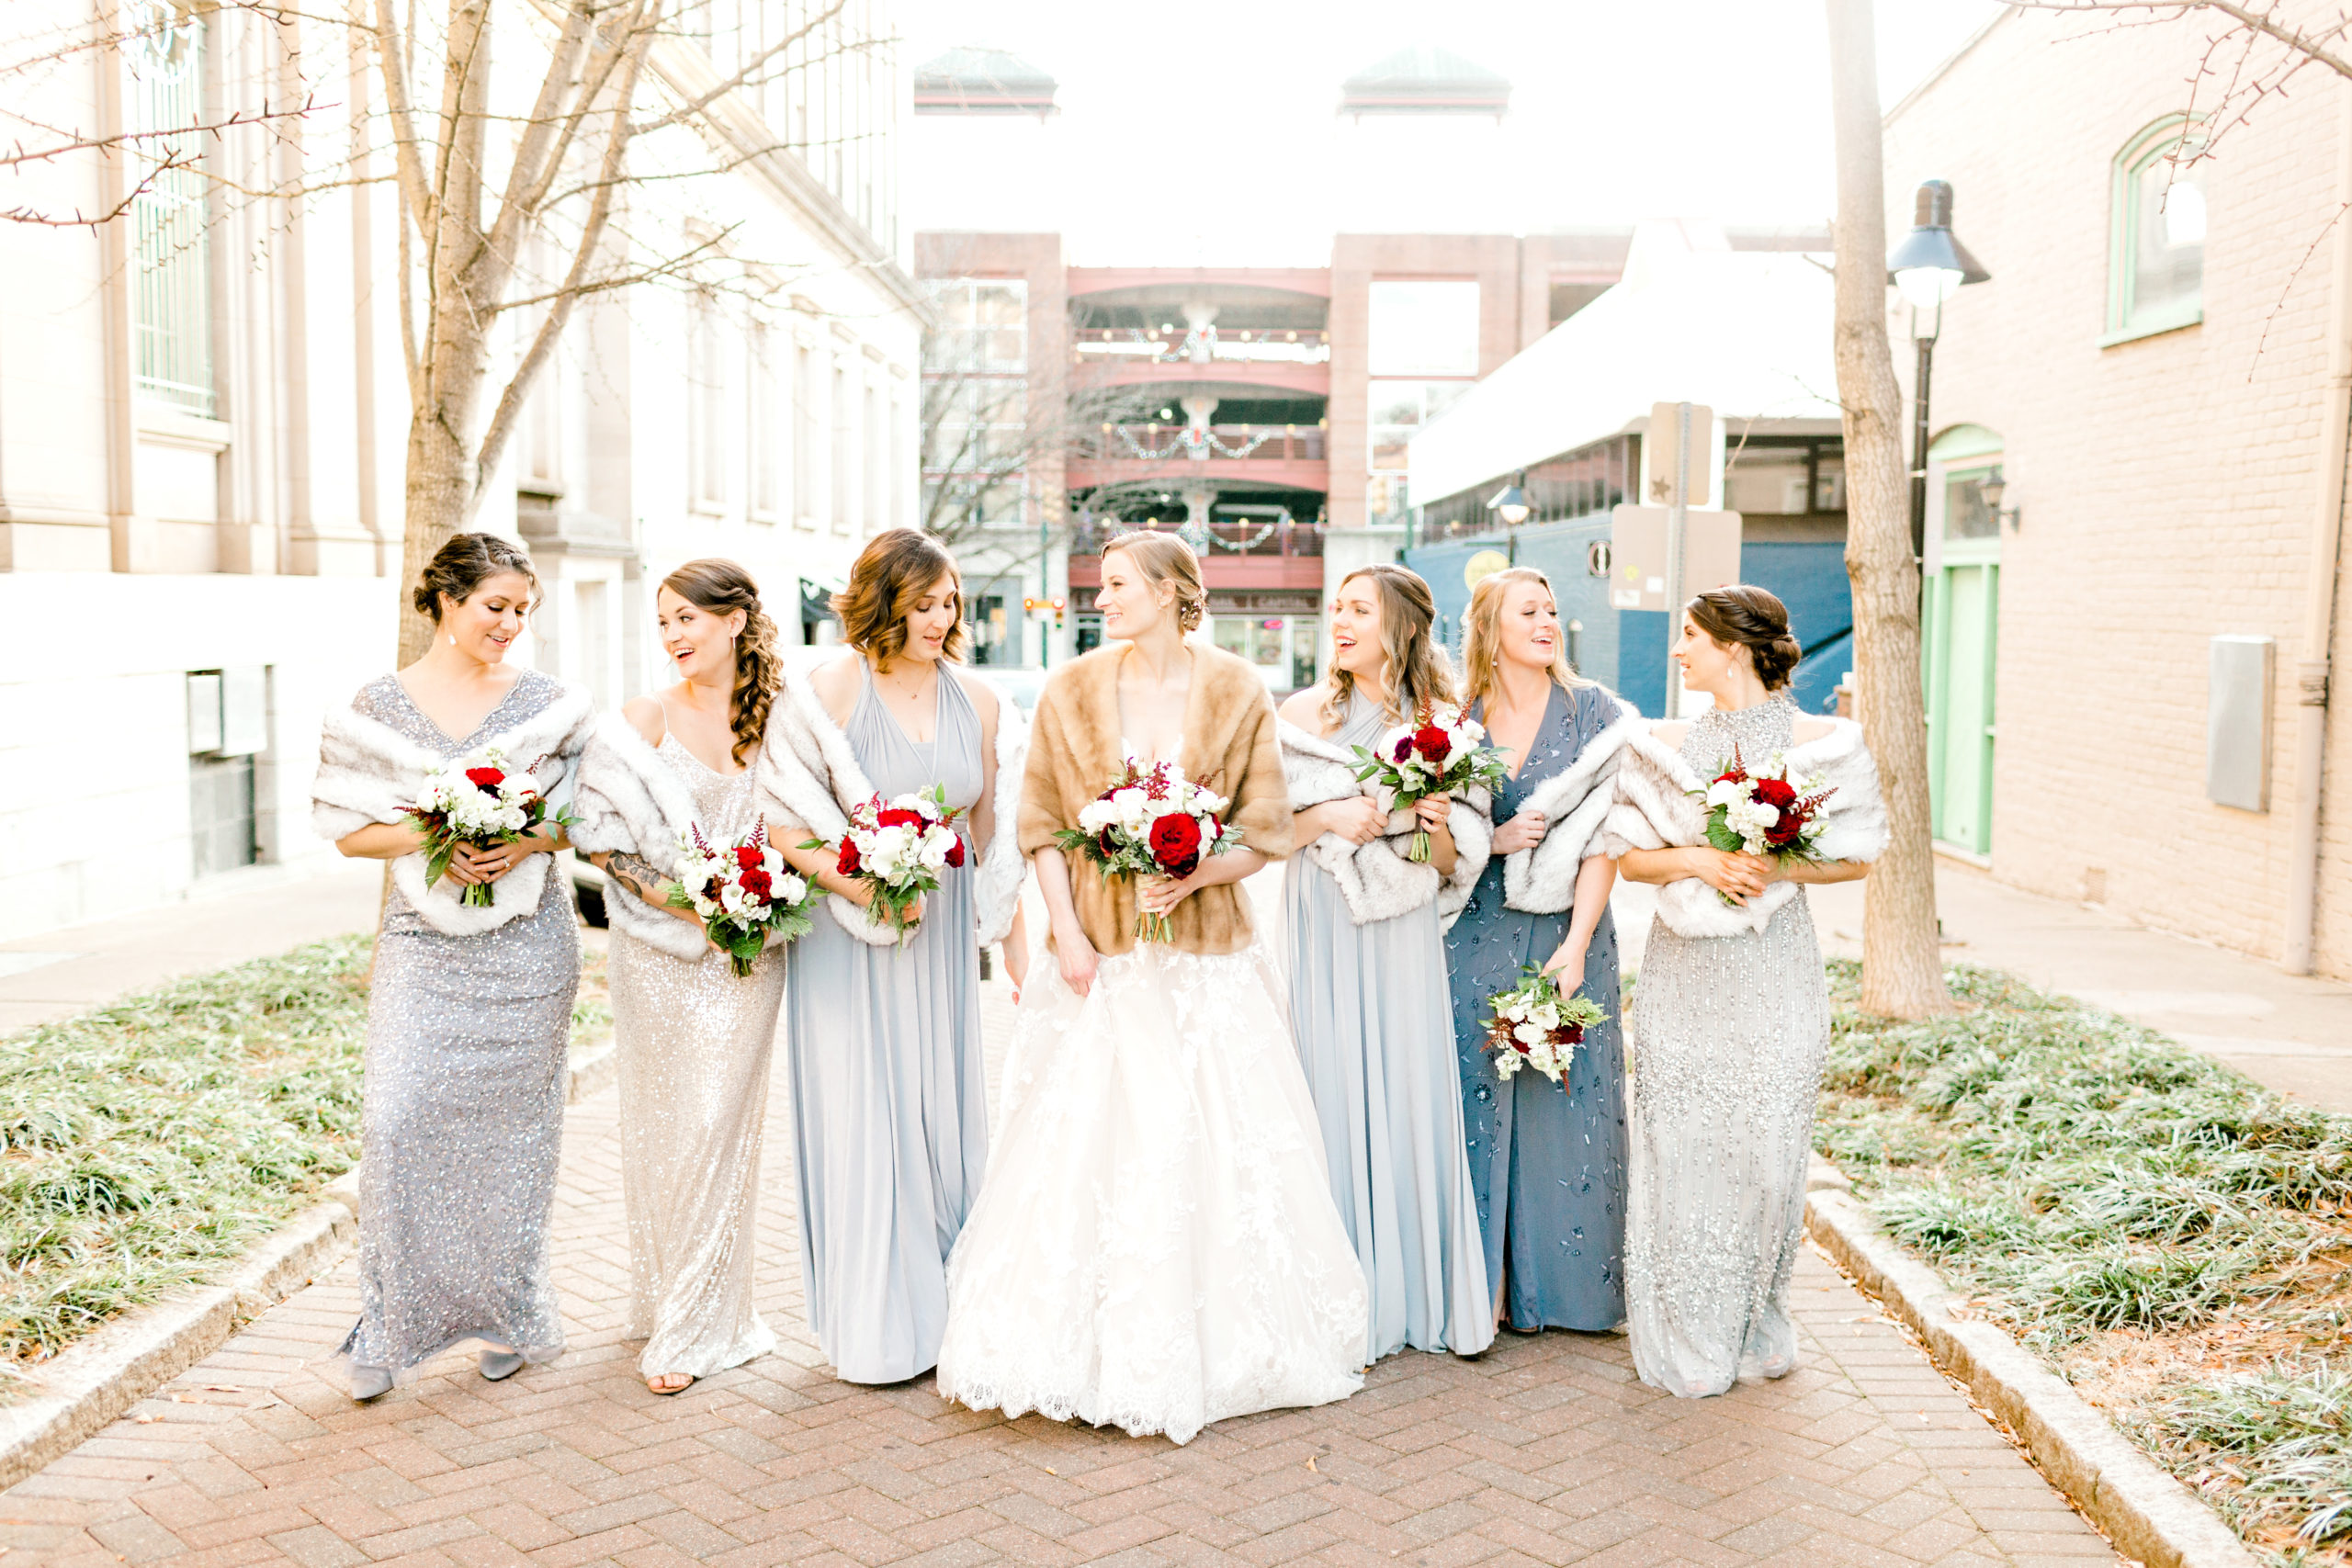 Bride and bridesmaids walking together with blue dresses and fur shawls